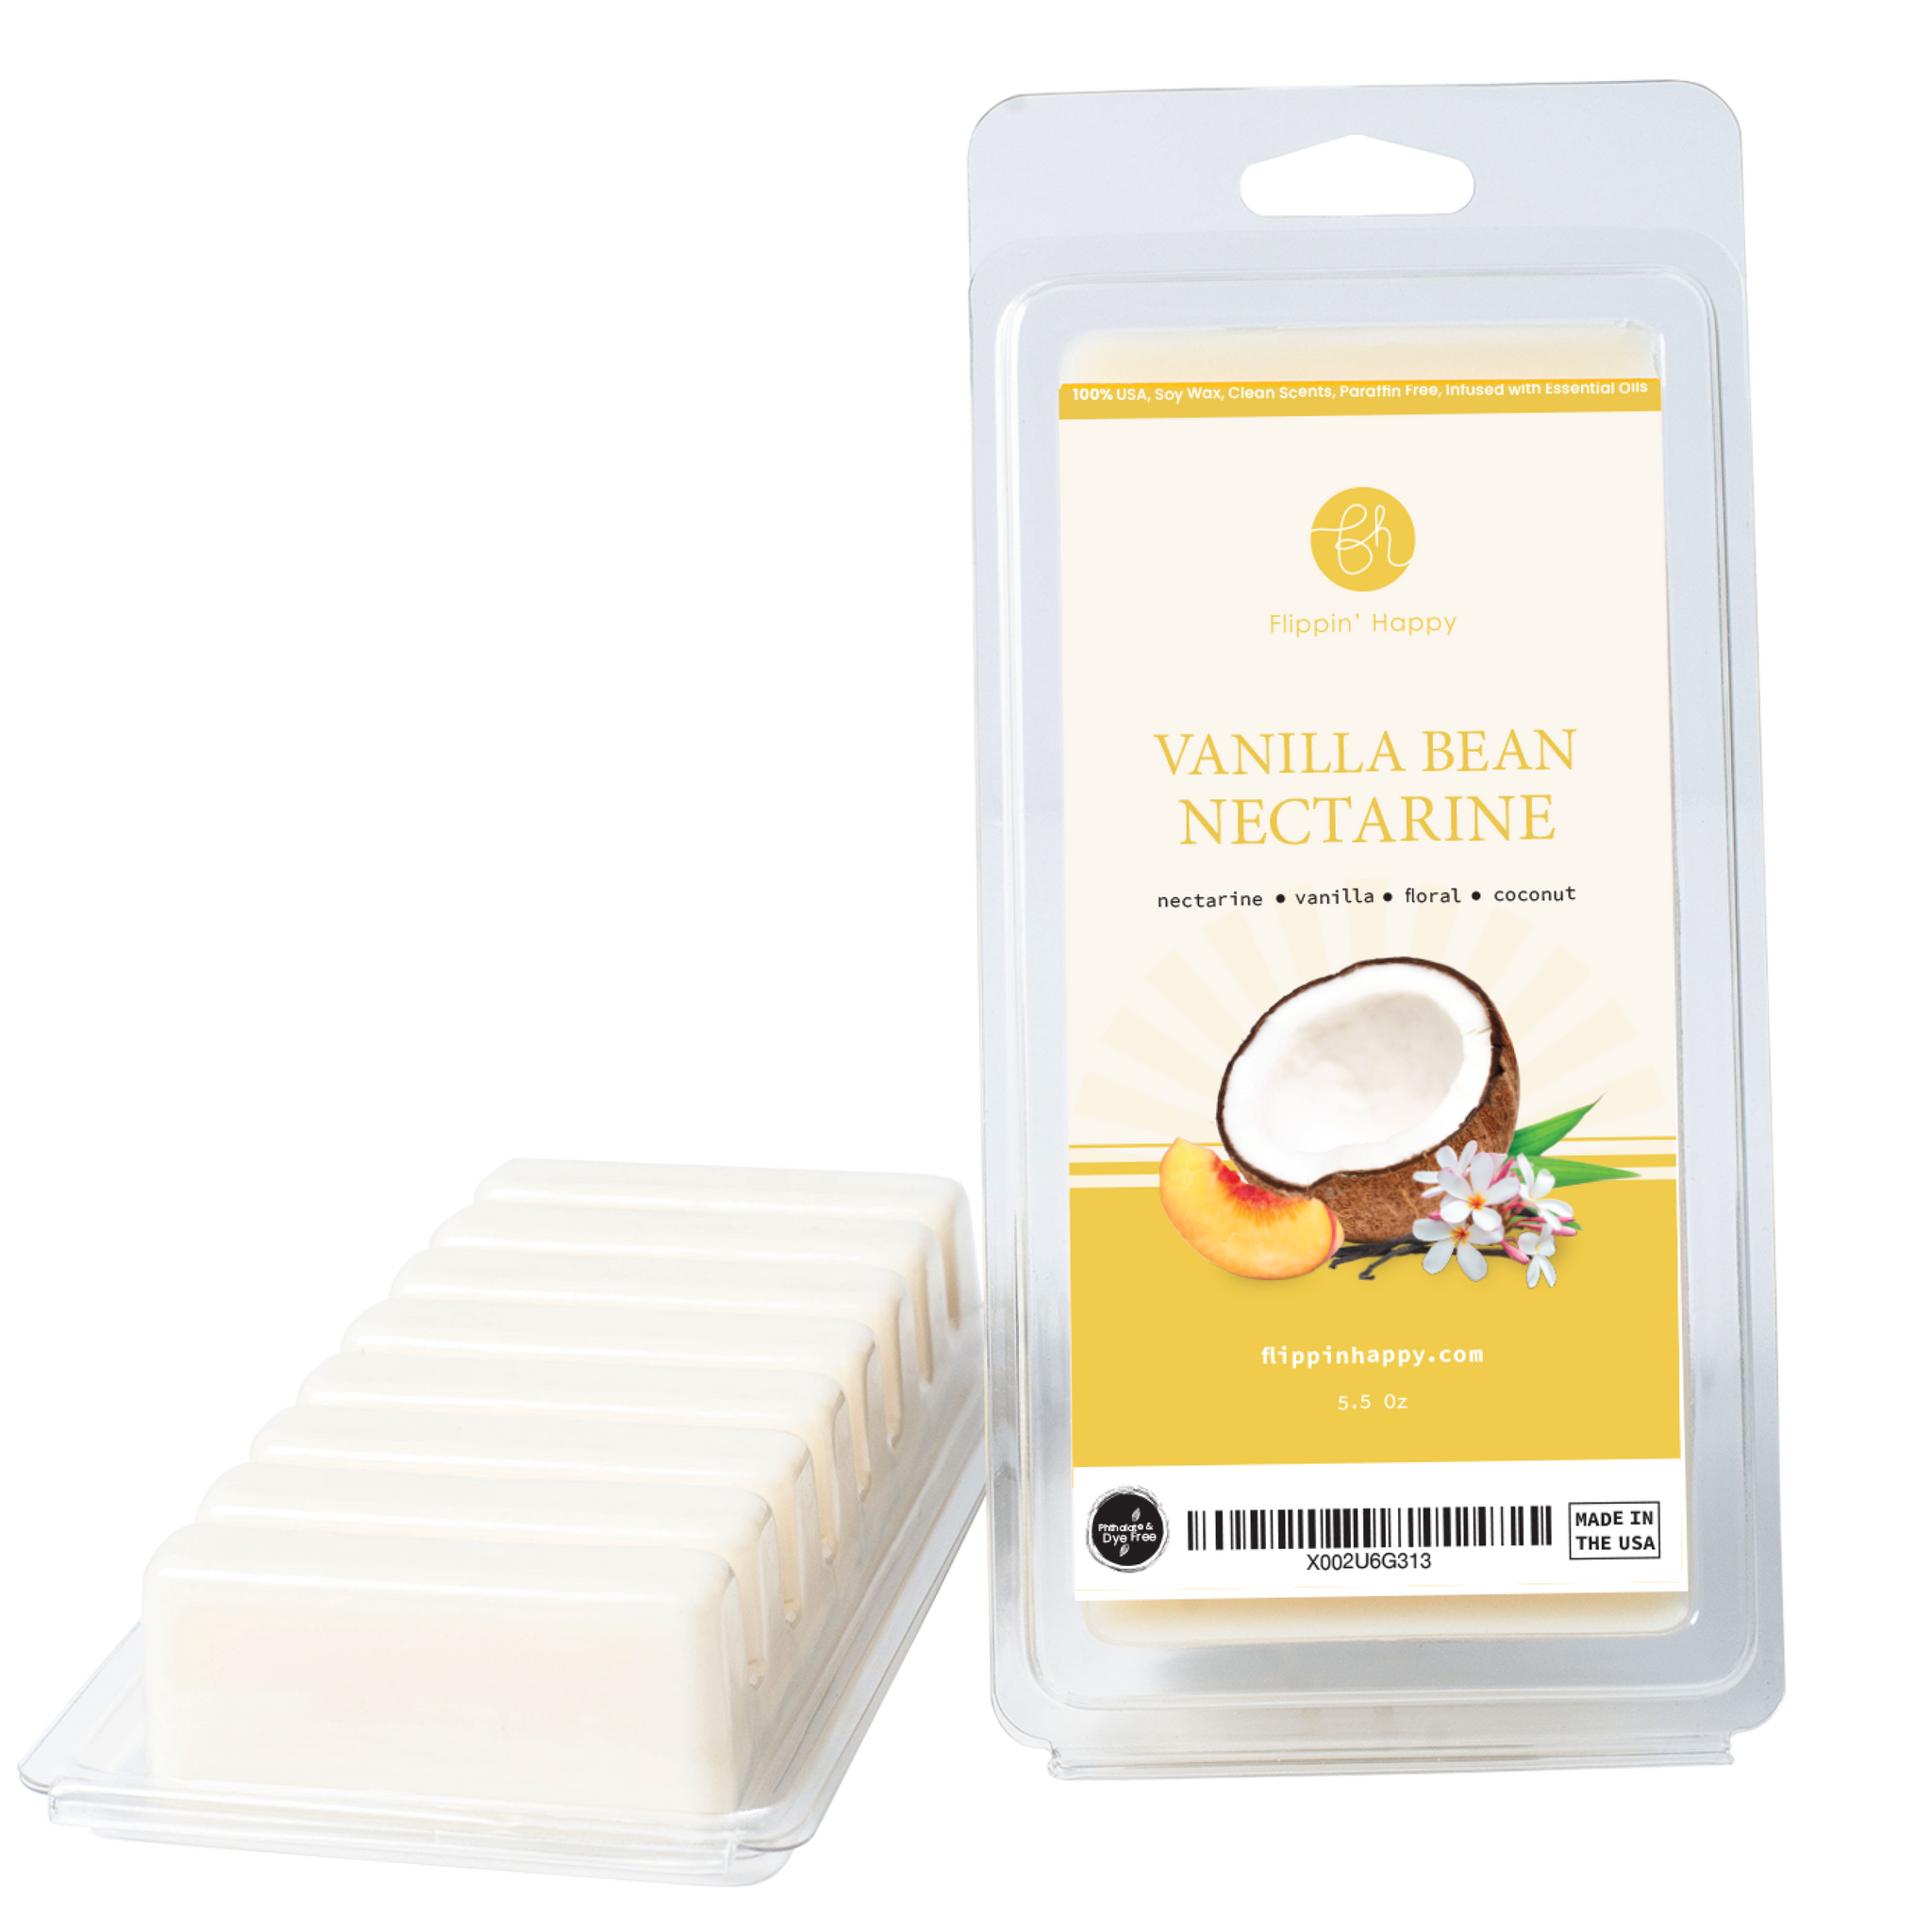 Flippin' Happy Scented Wax Melts for Electric Wax Warmers, Tart Burners, Candle Warmers and Melters, Organic 100% Soy Wax Melts, Wax Cubes, and Wax